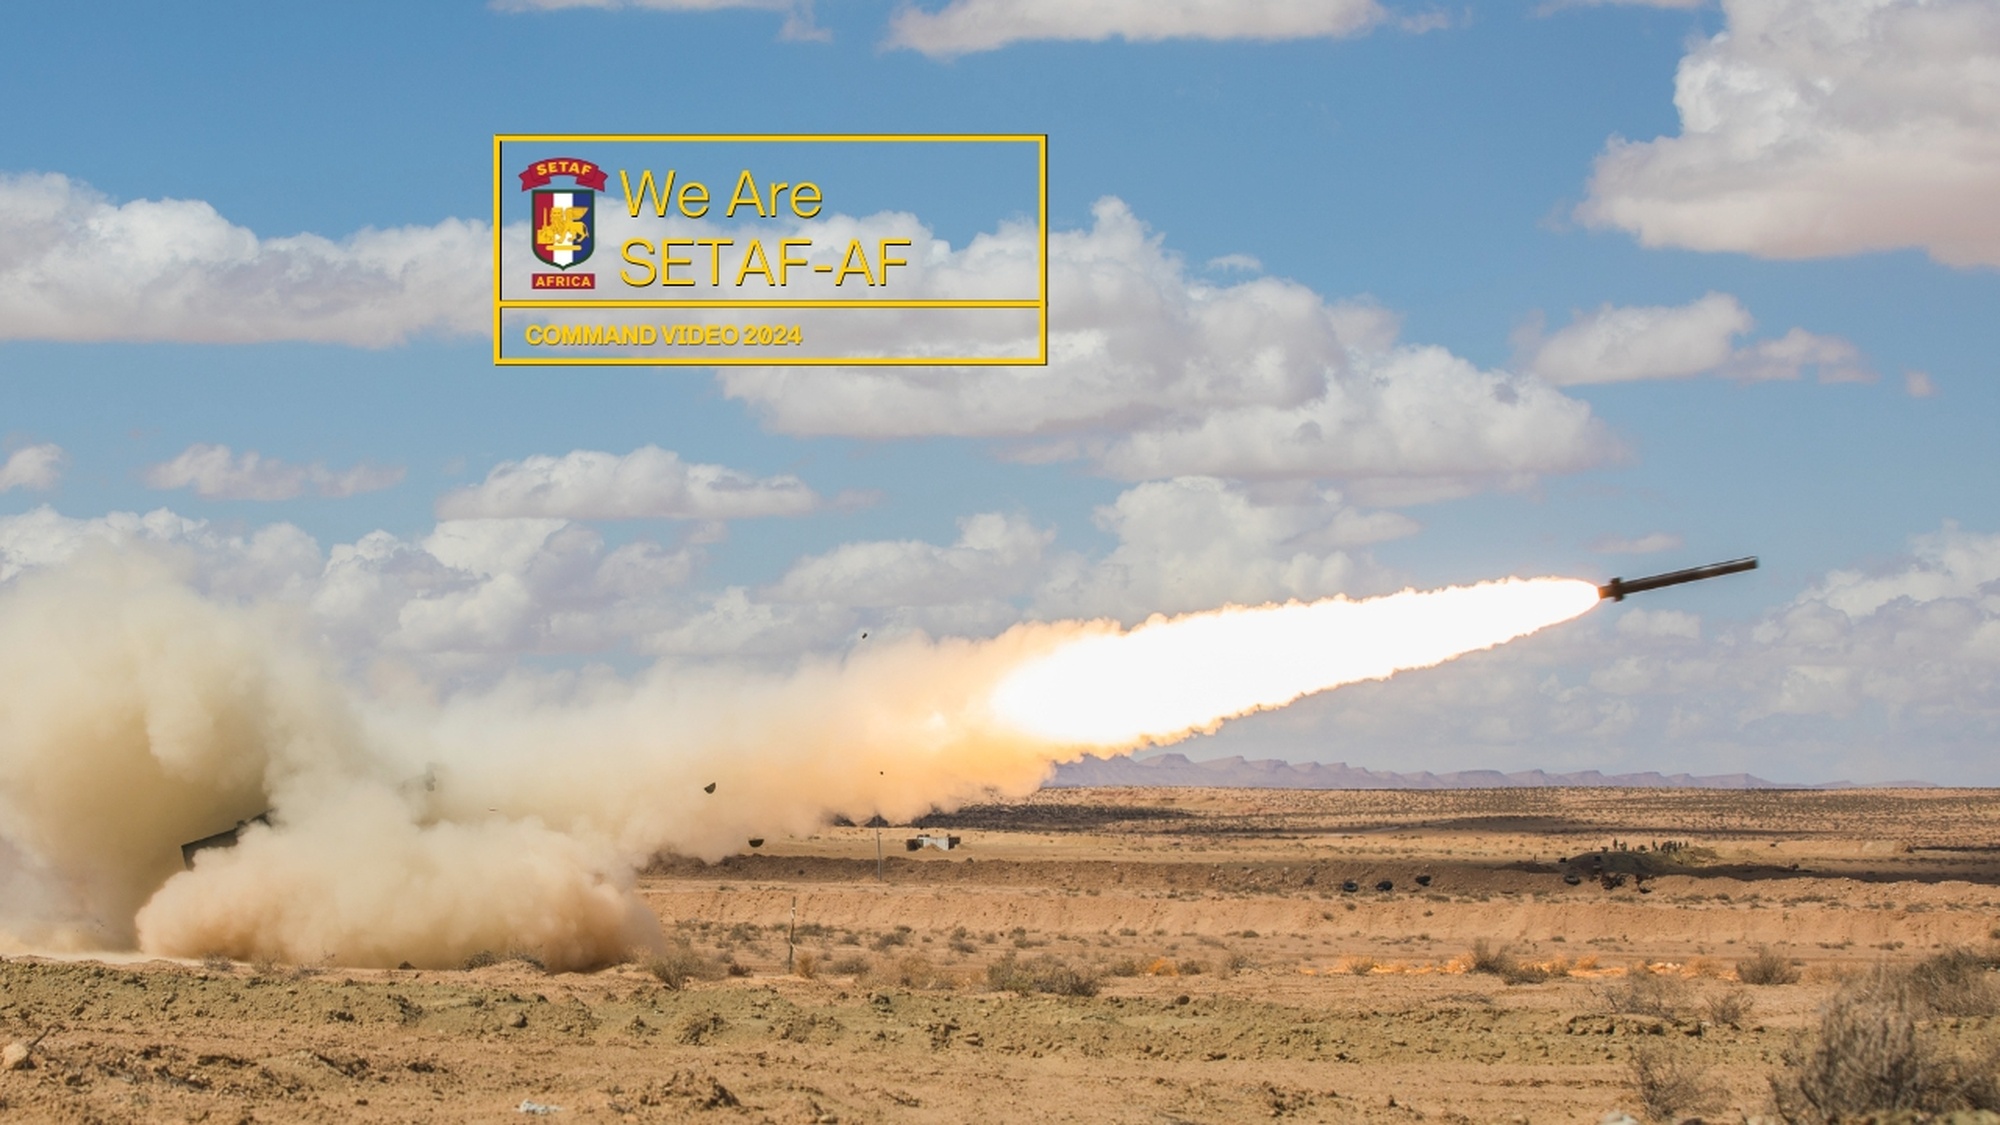 SETAF-AF provides U.S. Africa Command and U.S. Army Europe and Africa a dedicated headquarters to synchronize Army activities in Africa and scalable crisis-response options in Africa and Europe. (U.S. Army video edited by Chris House)